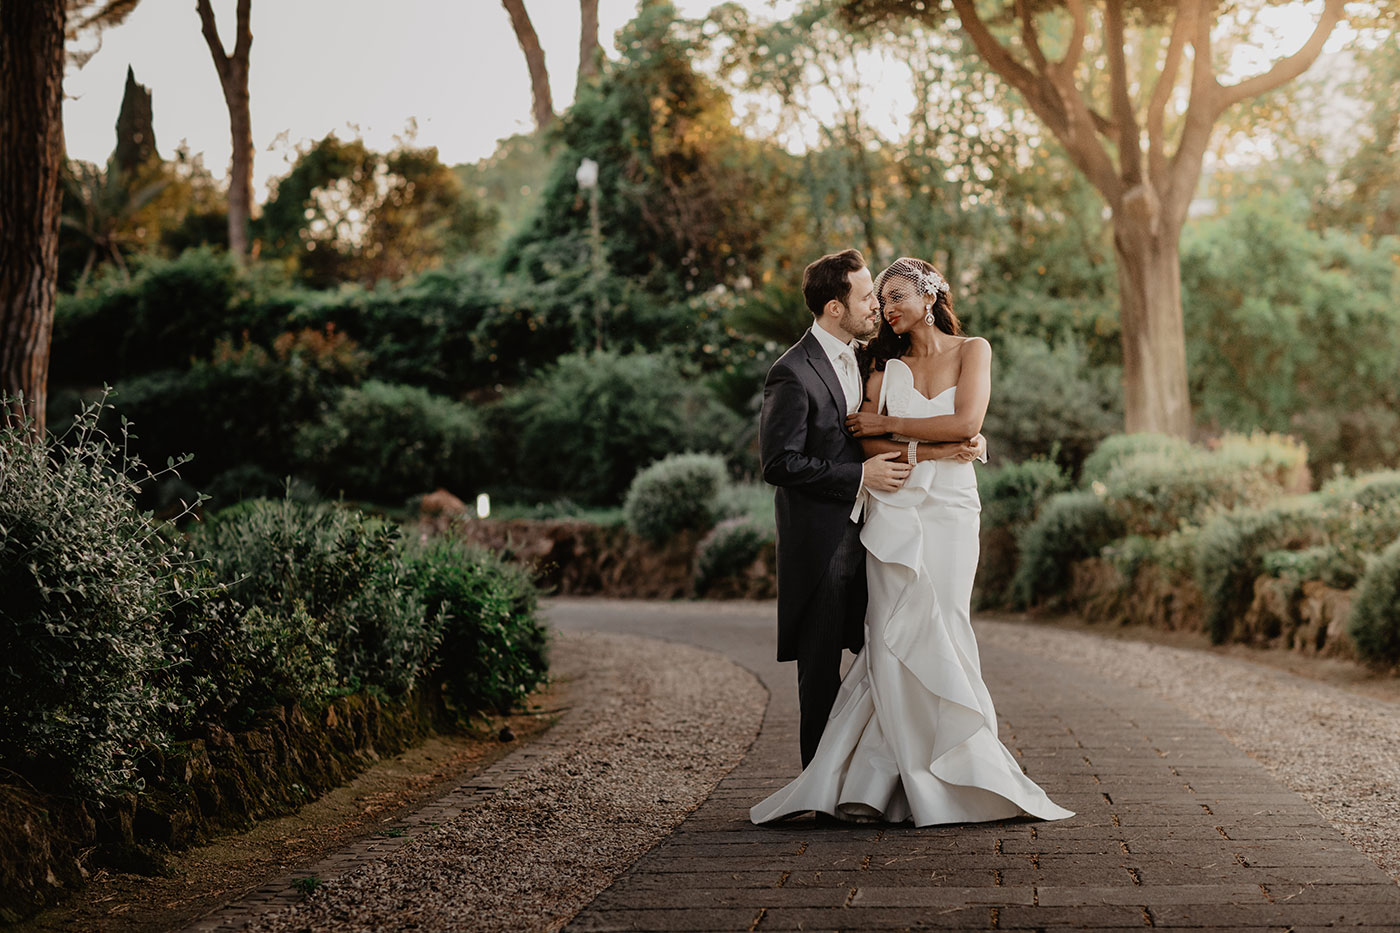 €2,000 More Reasons to have an Italian Destination Wedding